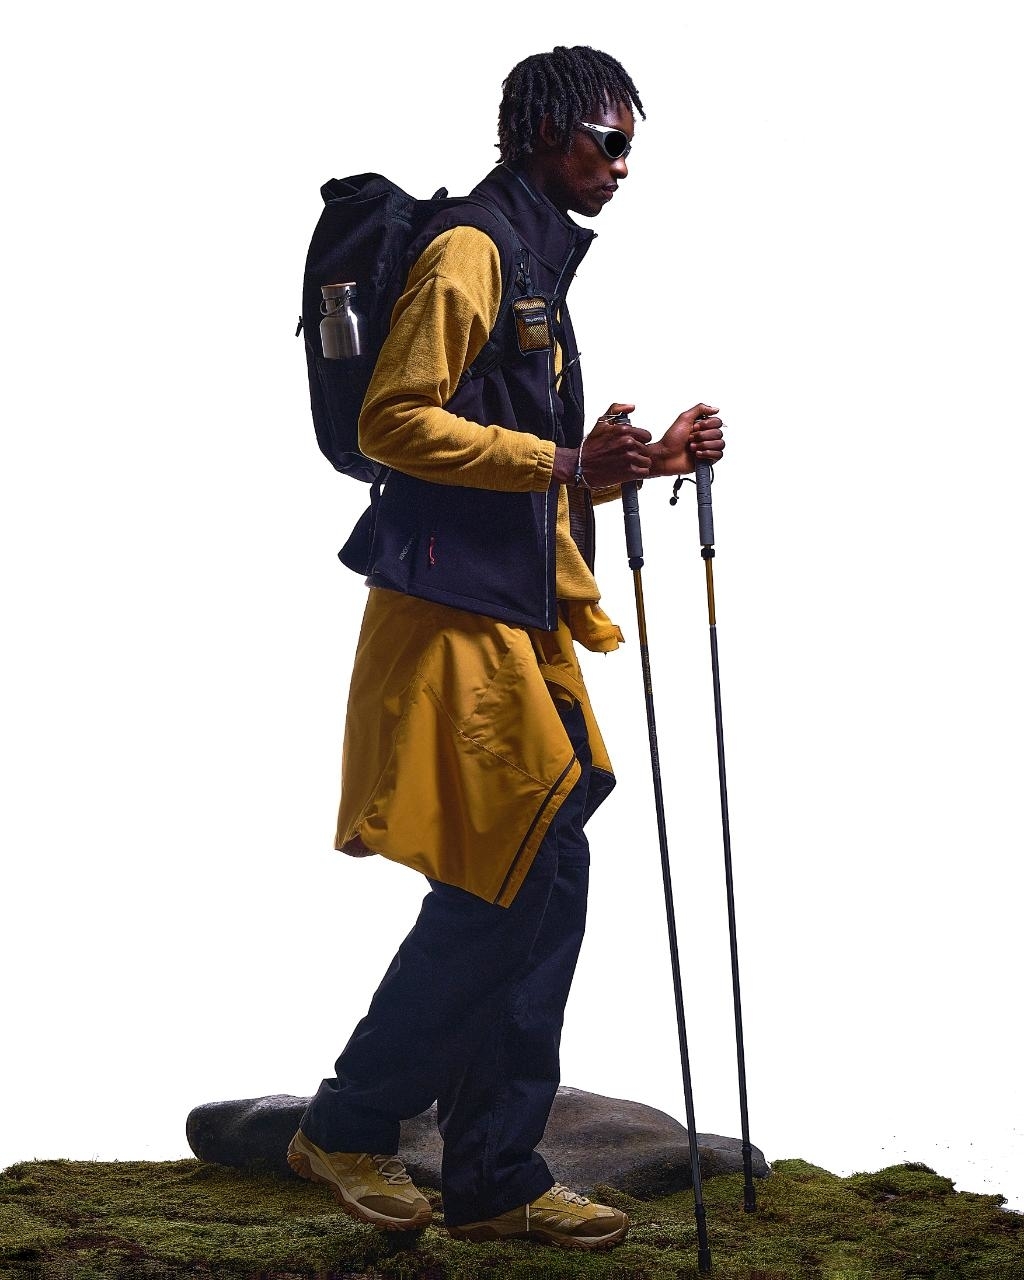 Man with backpack and walking poles in hiking attire, including a jacket and cargo pants